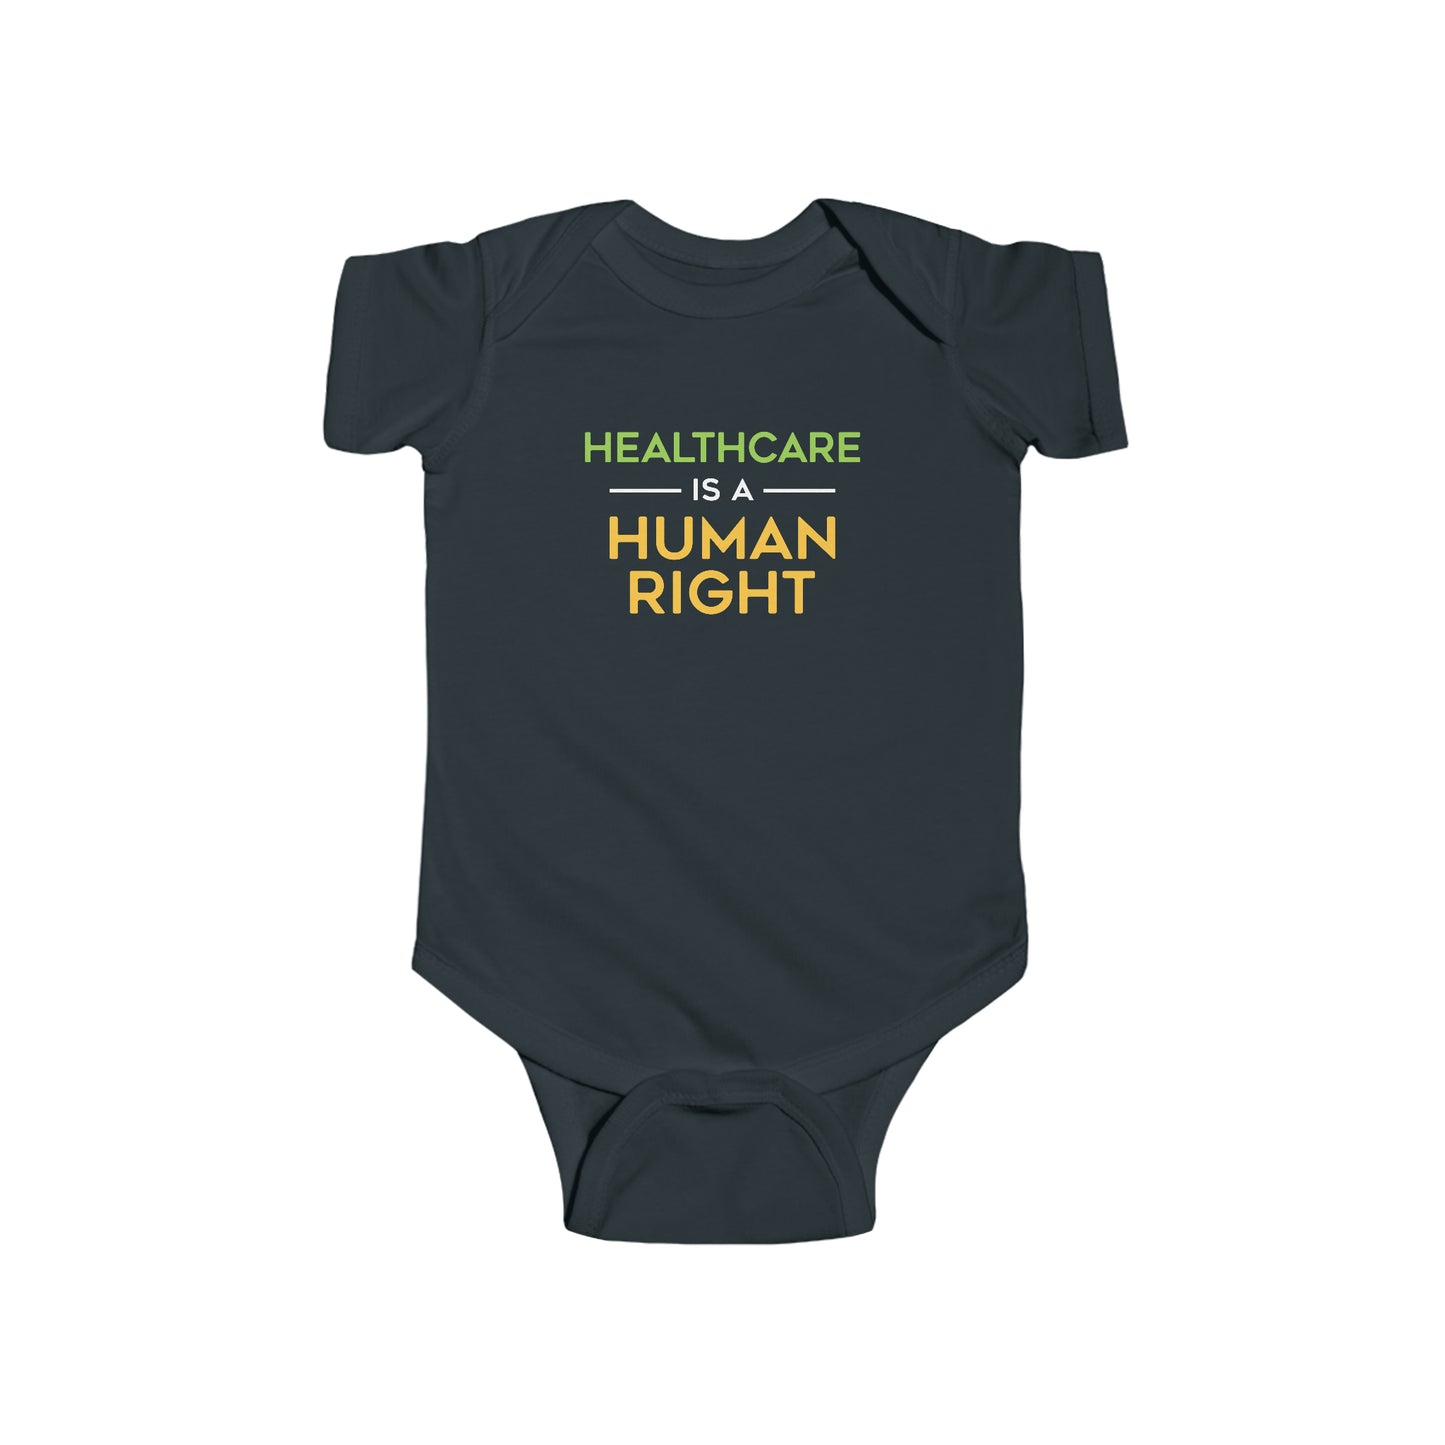 “Healthcare Is A Human Right” Infant Onesie